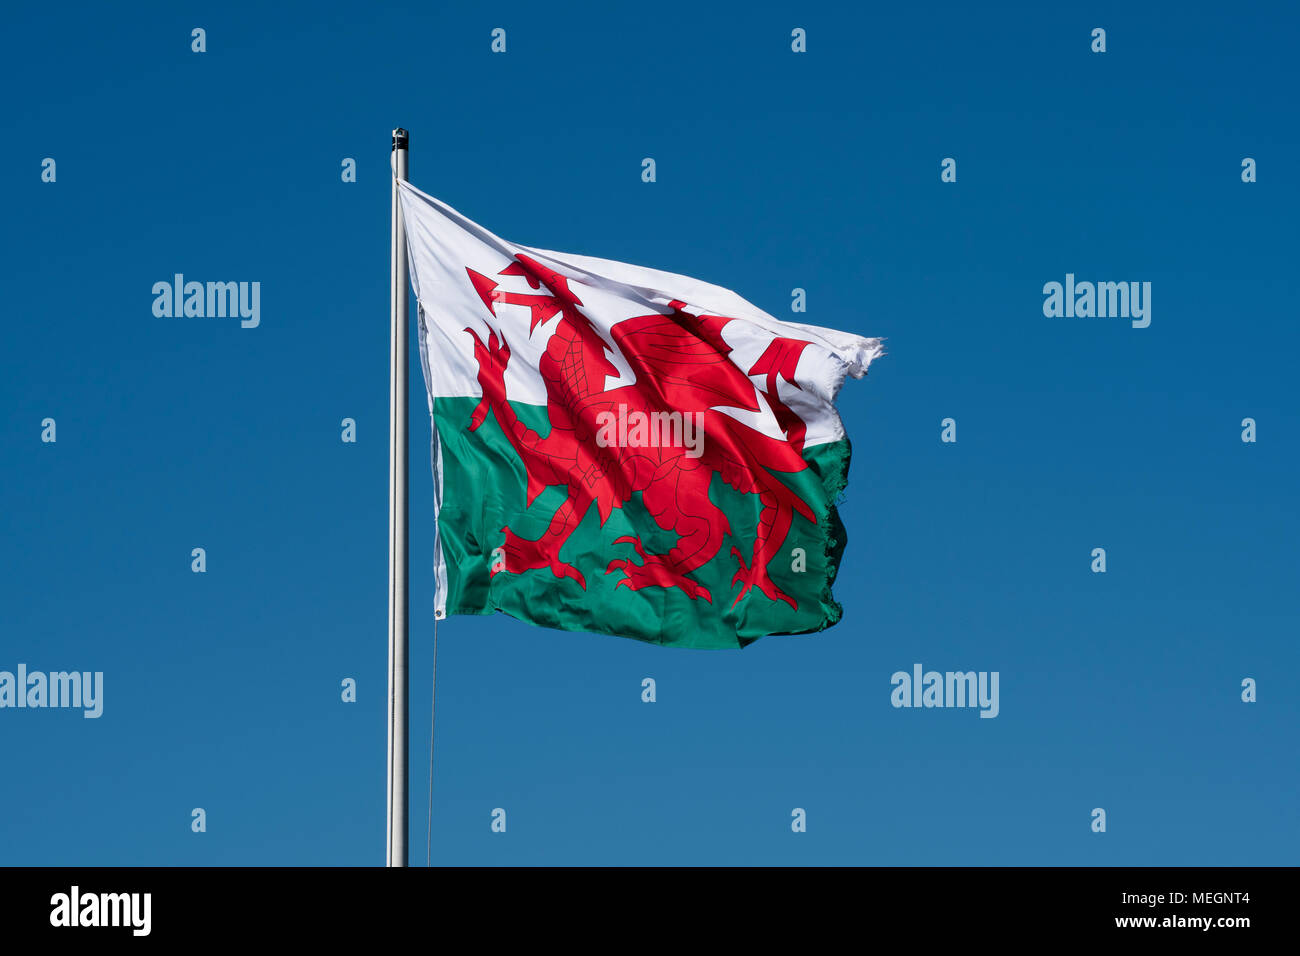 Y Ddraig Goch - The Red Dragon, the National Flag of Wales, a country in the United Kingdom flutterin in the breeze on a sunny day.. Stock Photo